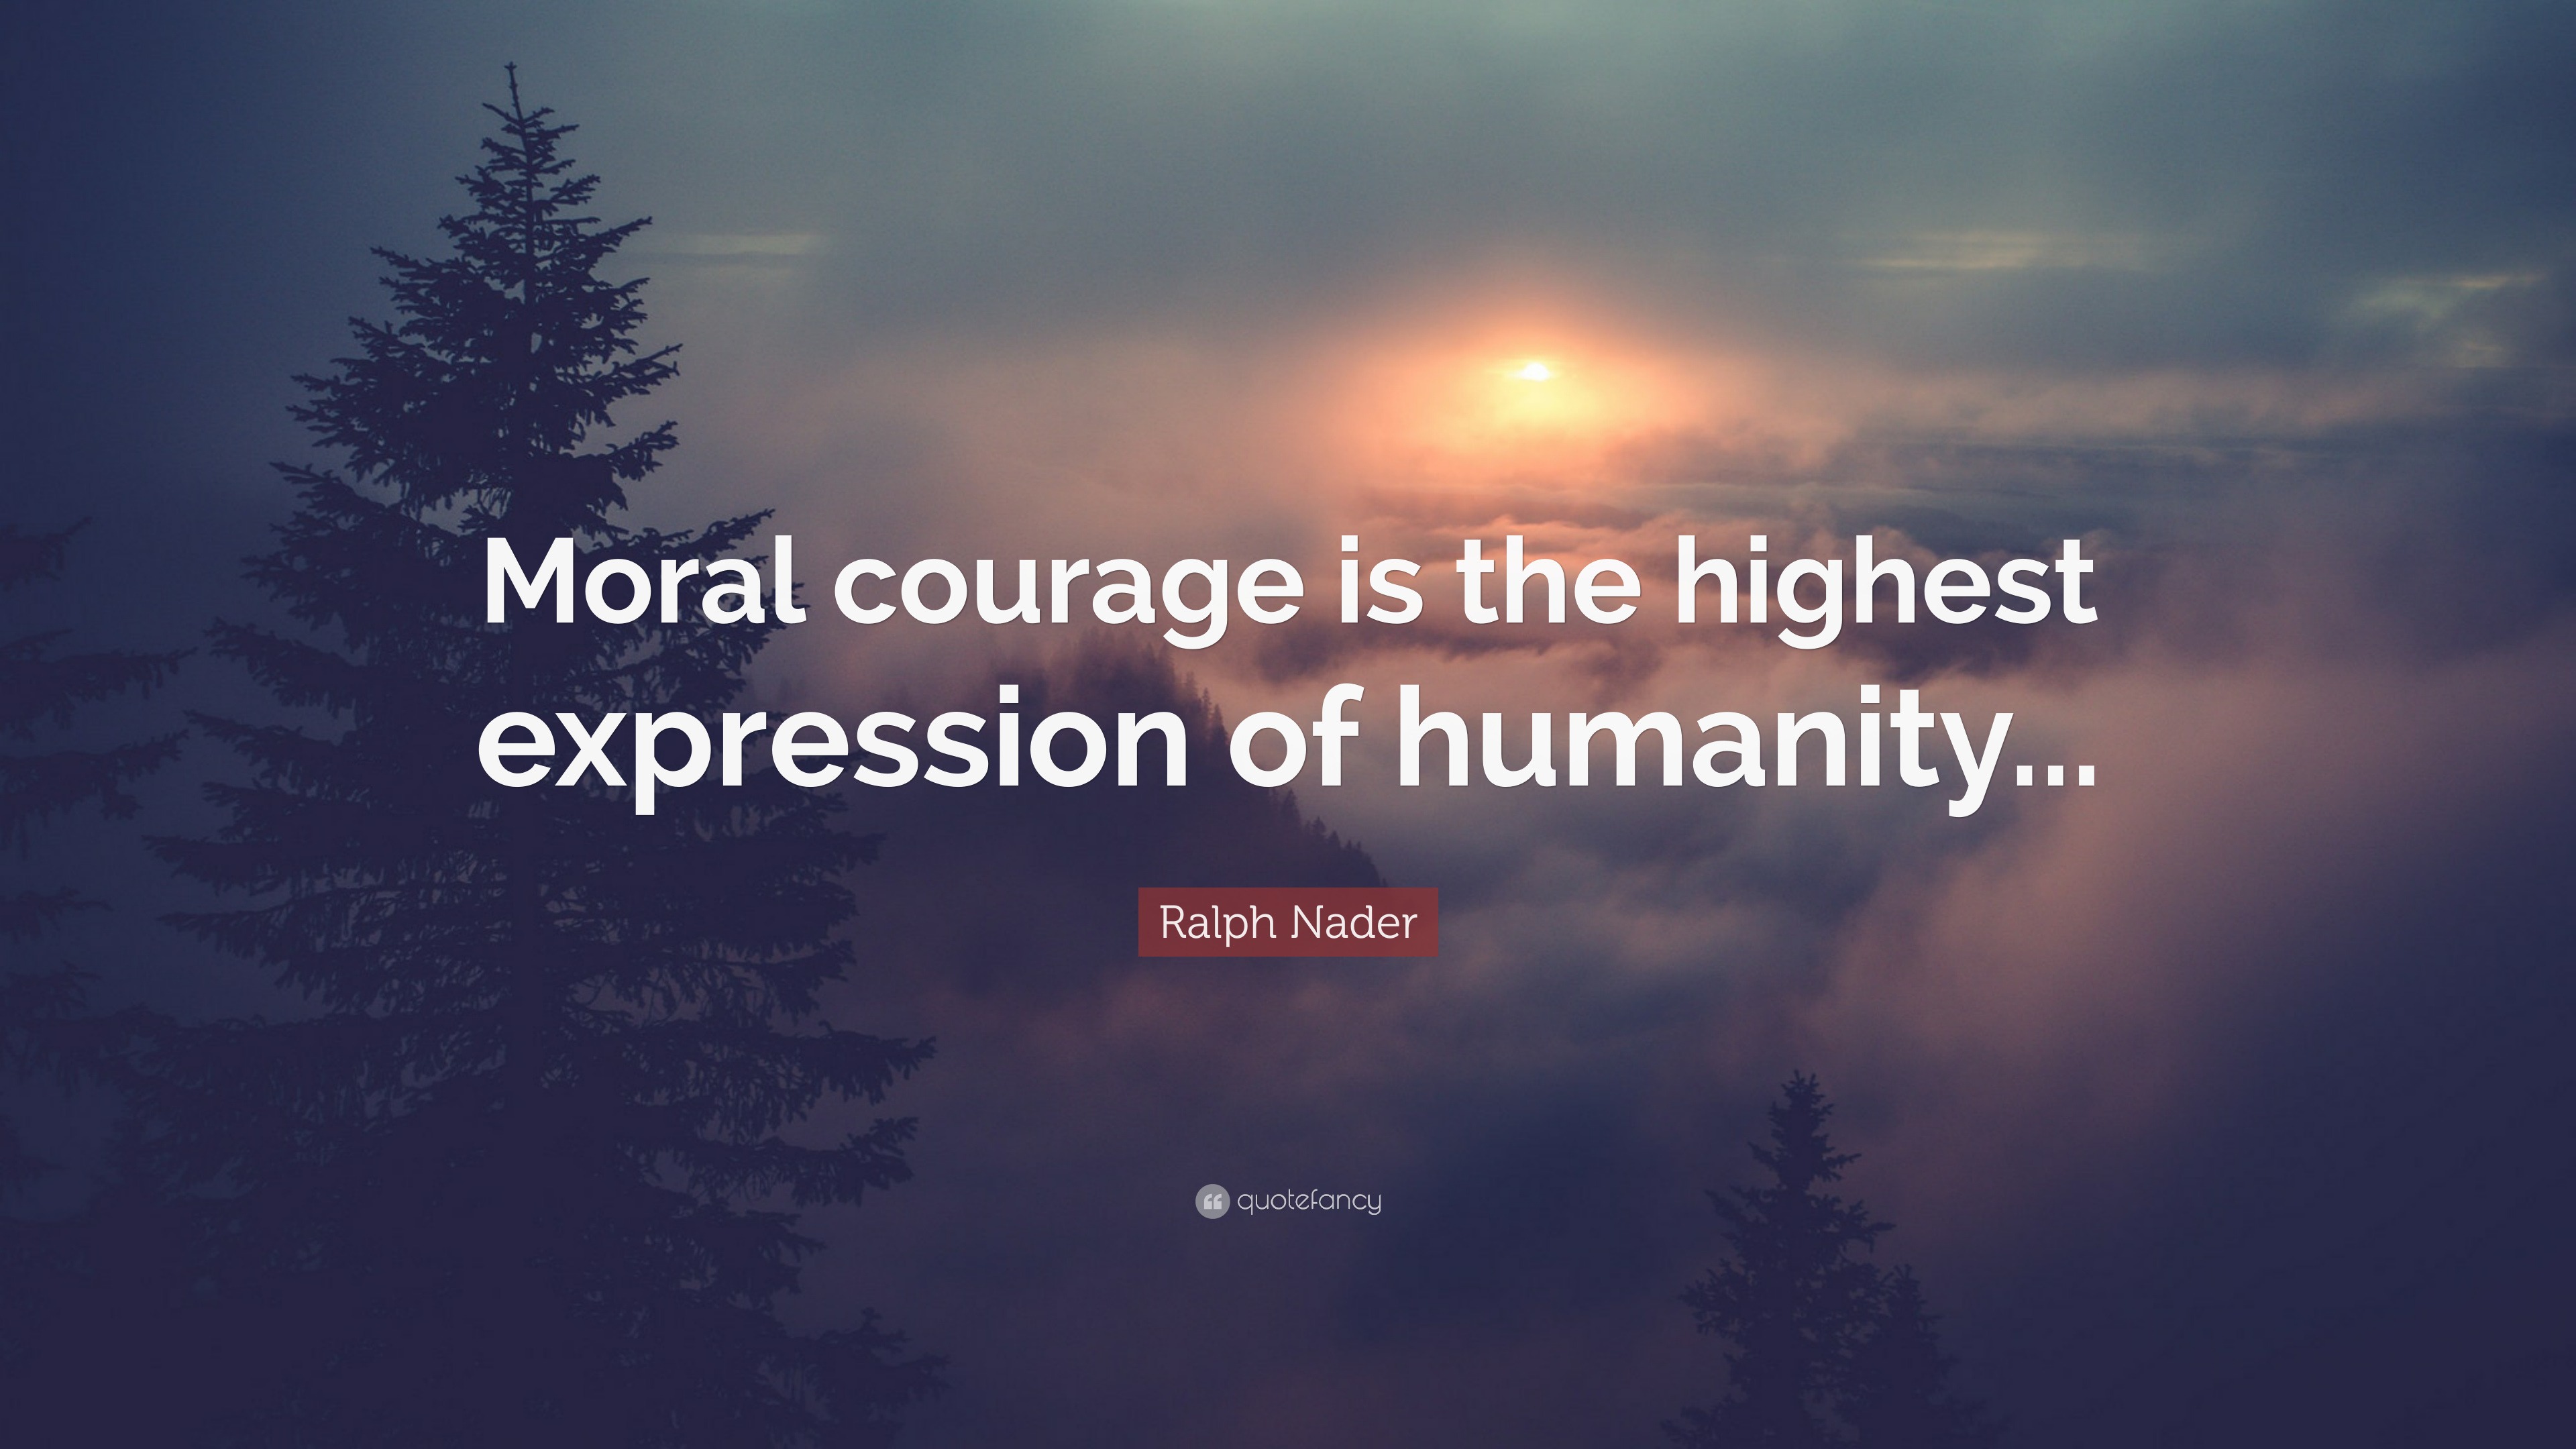 Ralph Nader quote: Moral courage is the highest expression of humanity.